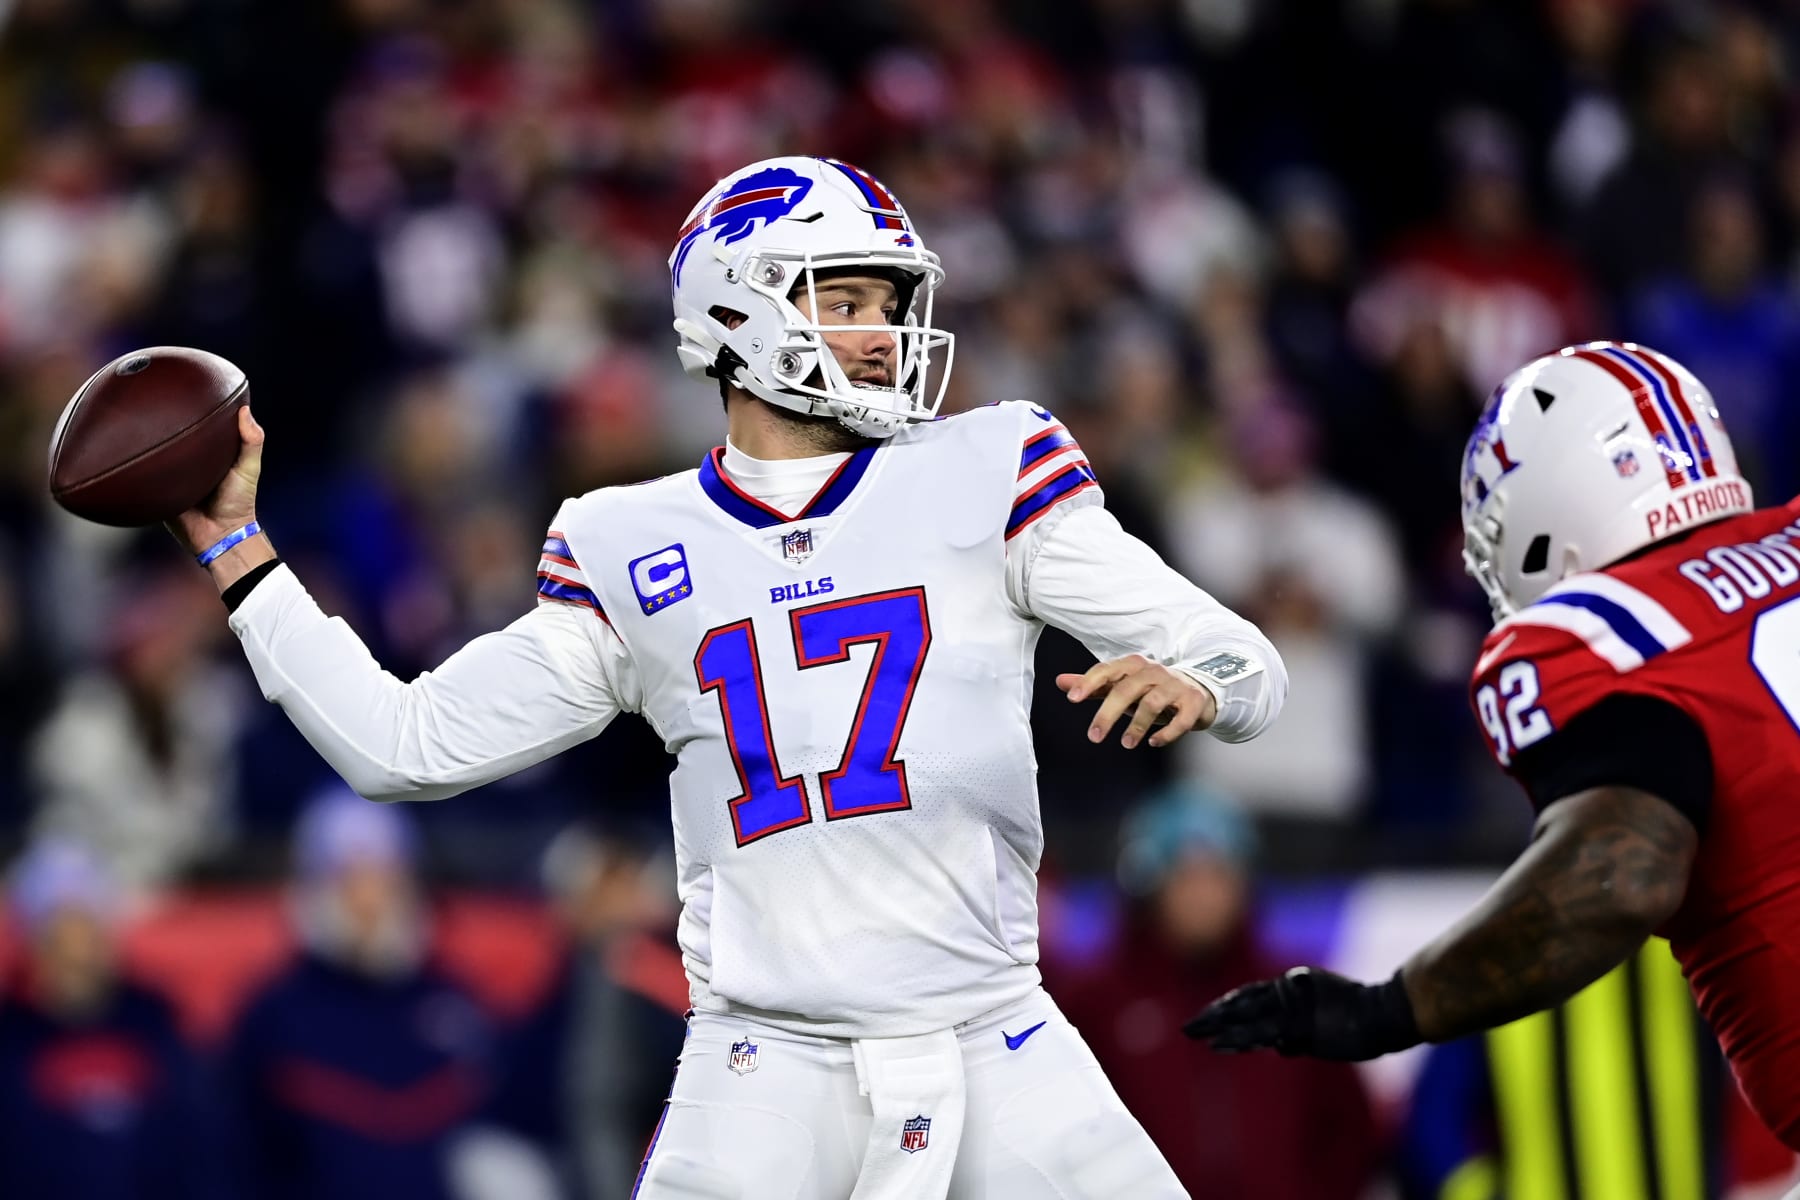 NFL Playoff Projection: With Bills-Bengals canceled, seeding